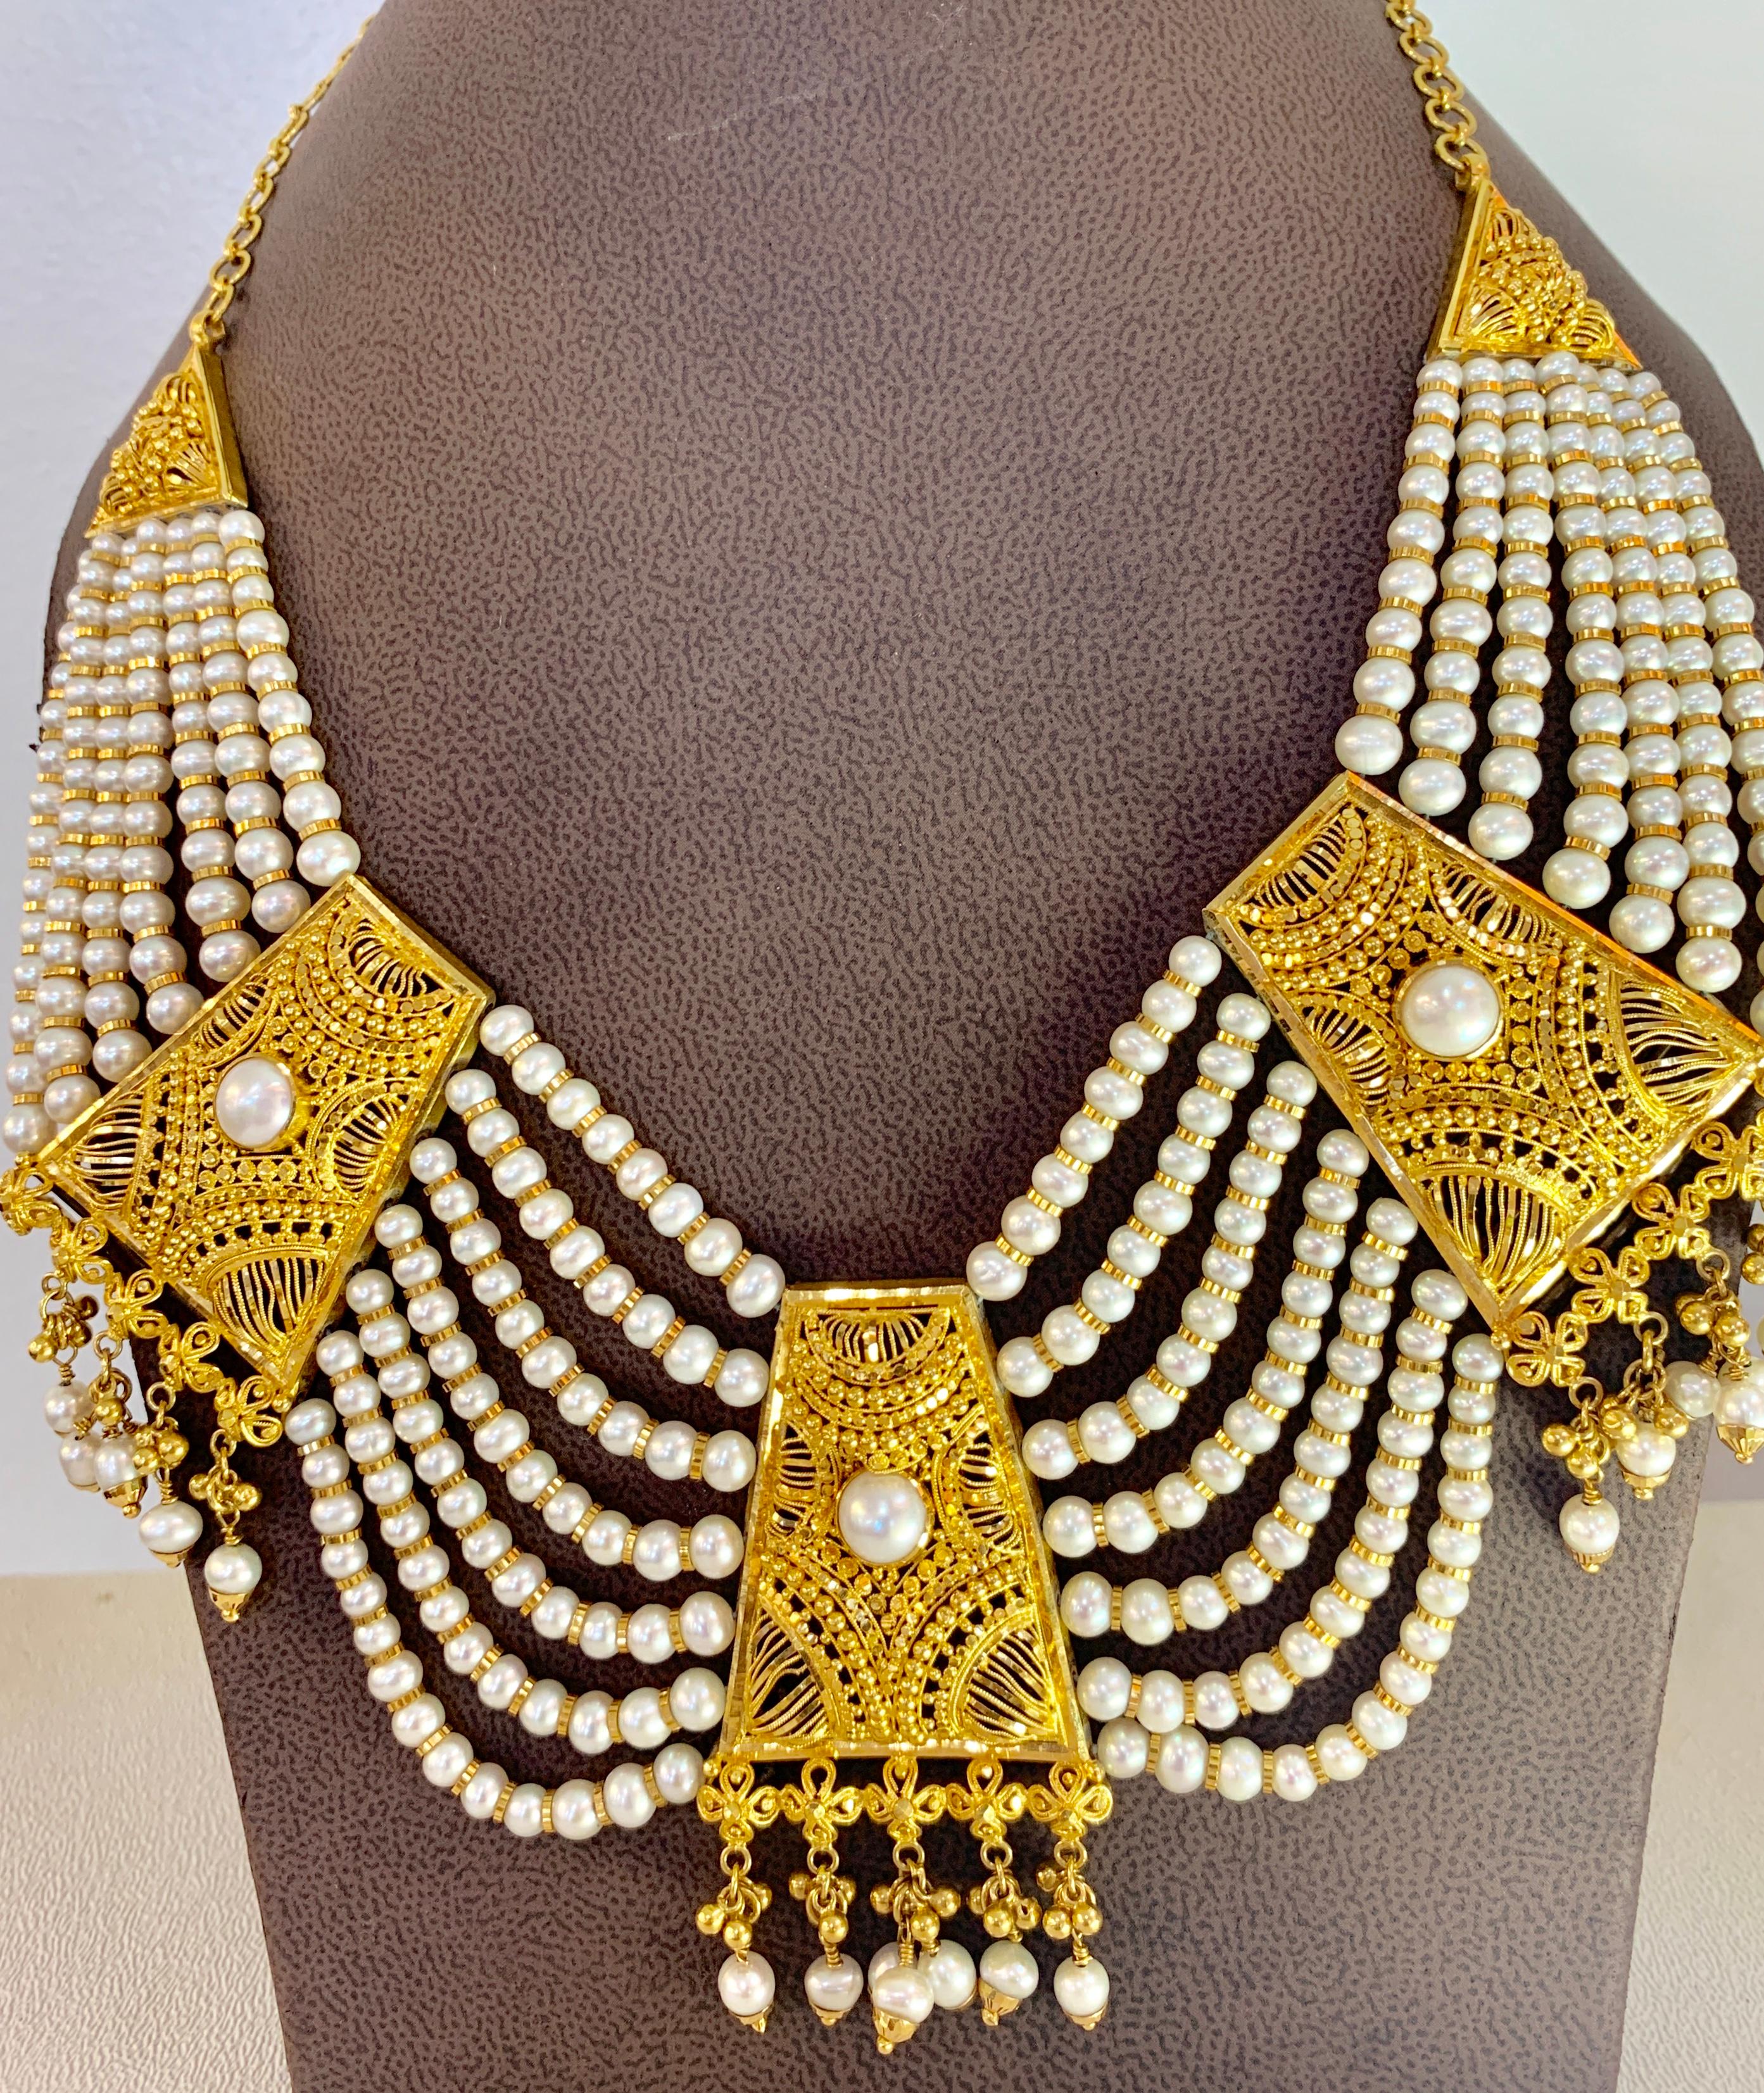  22 Karat  Gold  and Pearl Necklace  Bridal Princess Necklace
One of our very economic  Necklace  from our Bridal collection.
Three large gold pieces attached with lots of small pearl string and 22 karat gold roundels
adjustable as the chain is all